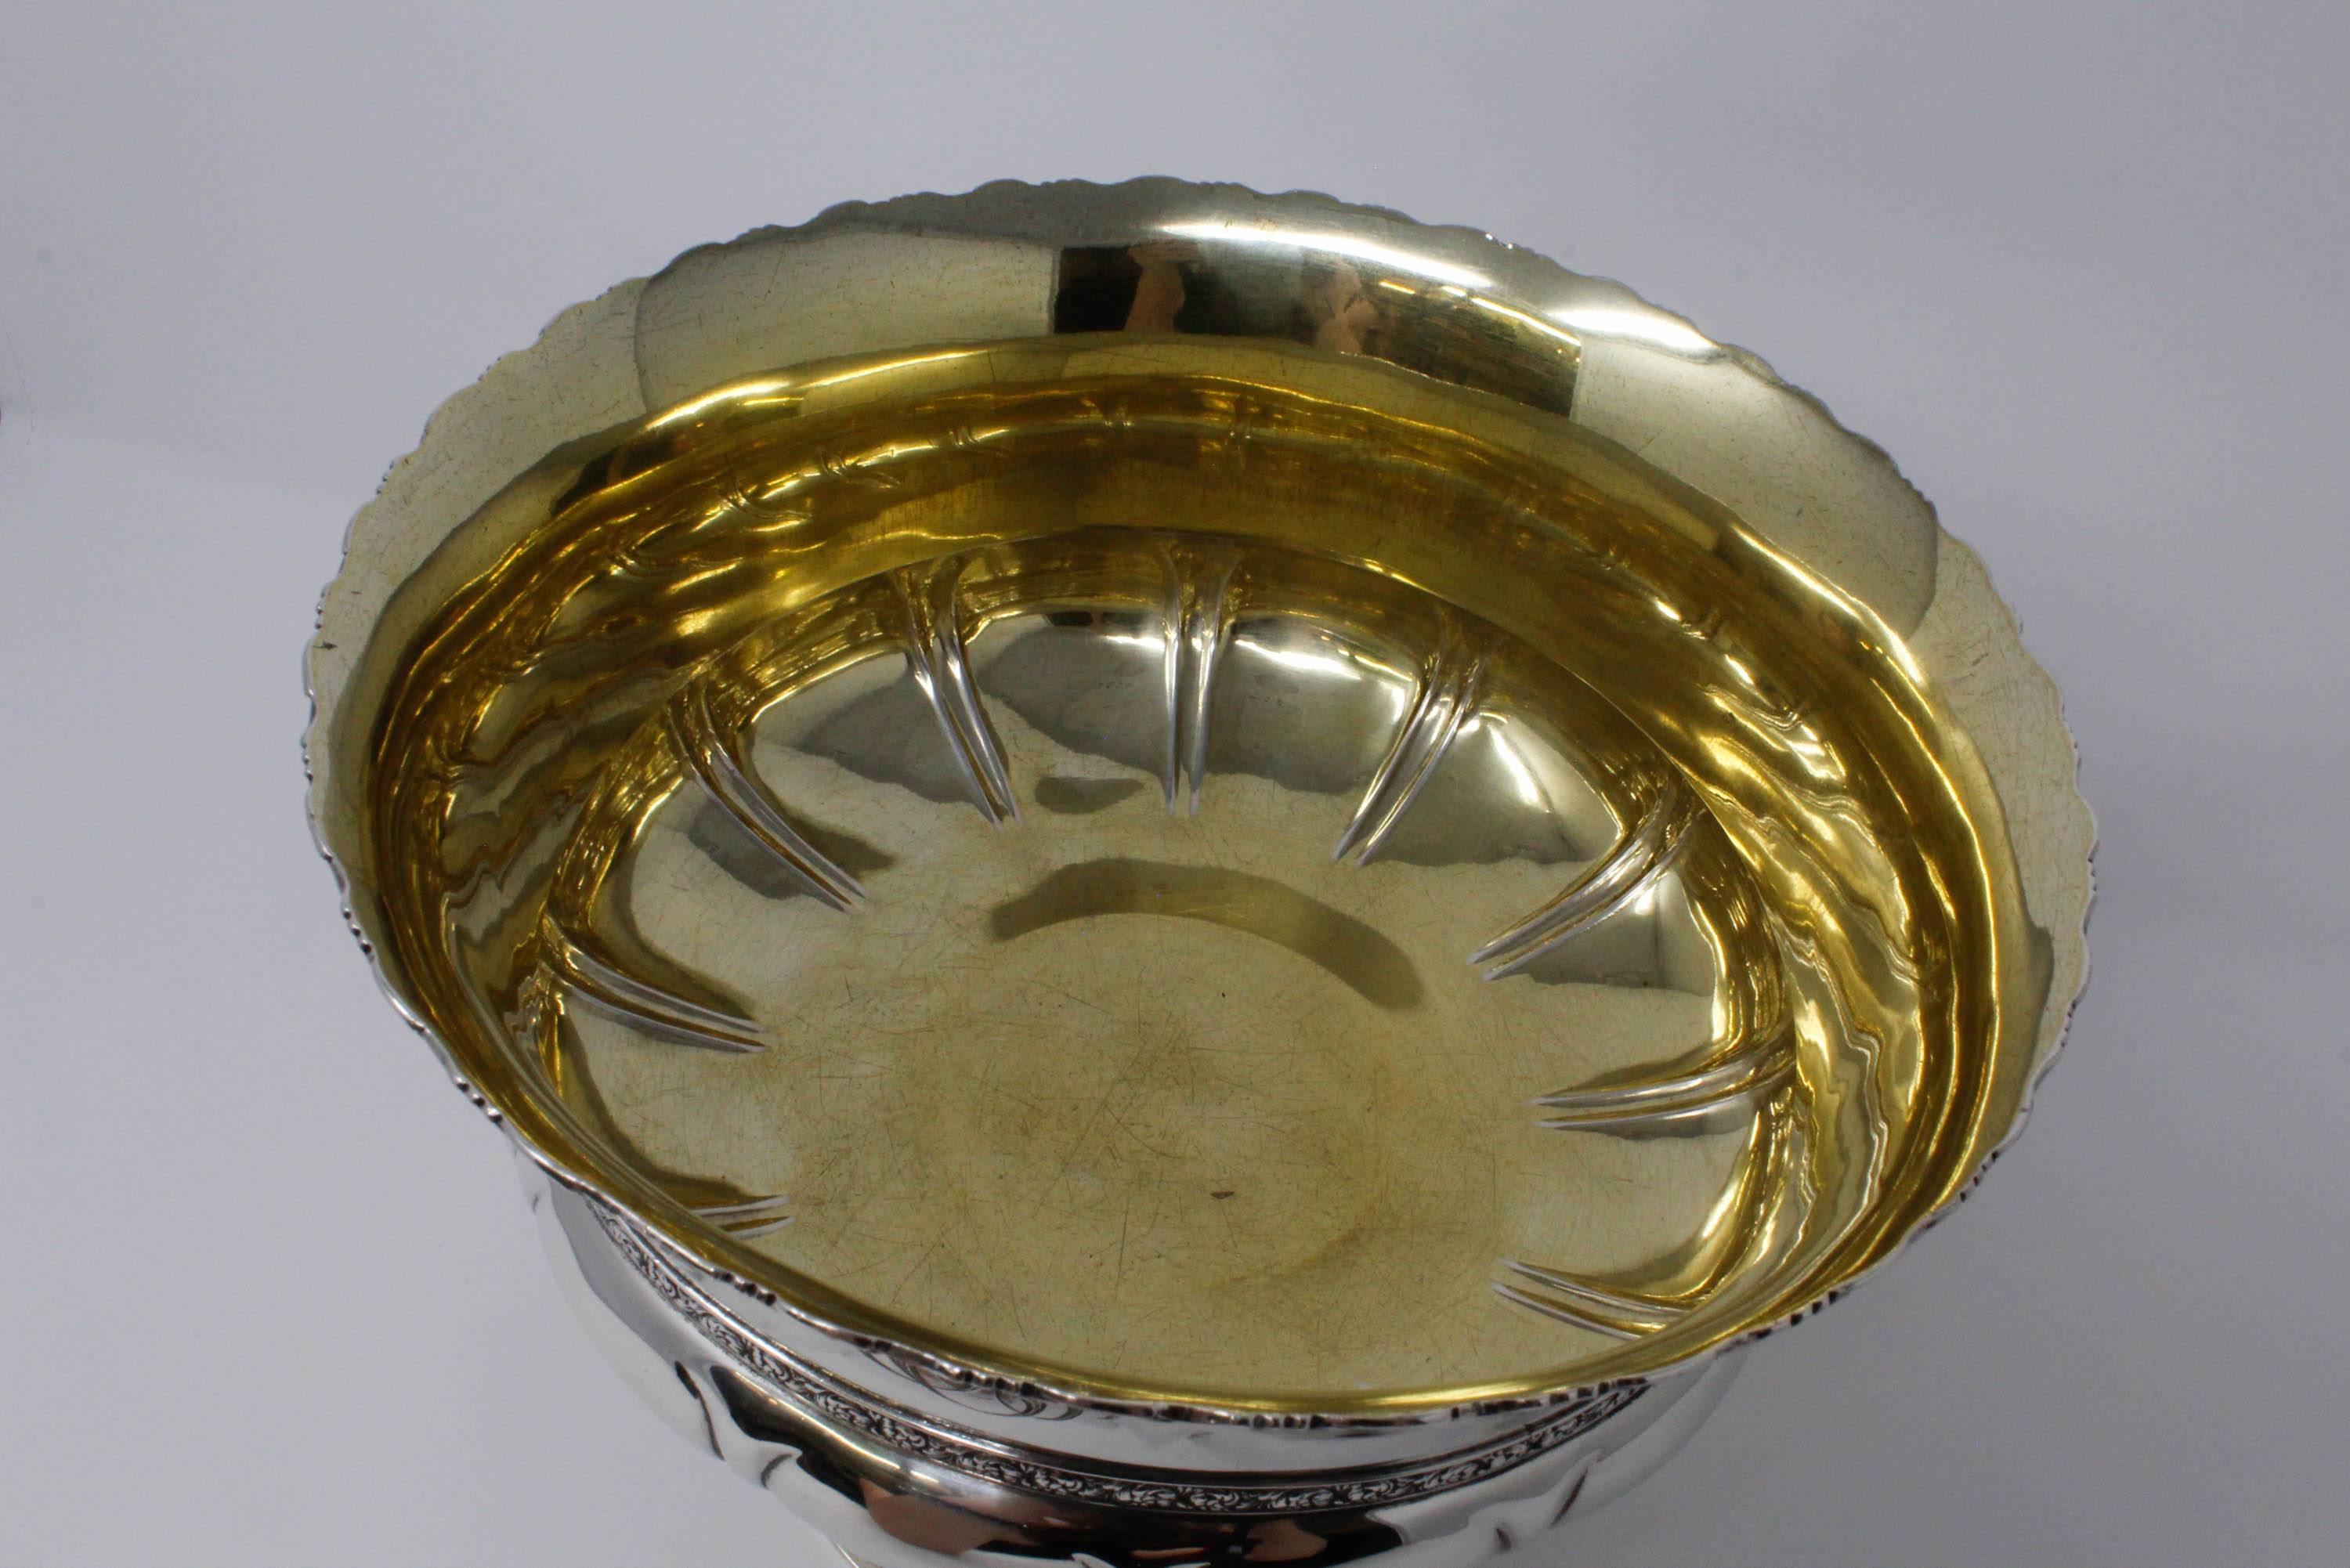 SS Tiffany & Co. Pedestal Bowl, circa 1891-1902 In Excellent Condition For Sale In Santa Fe, NM